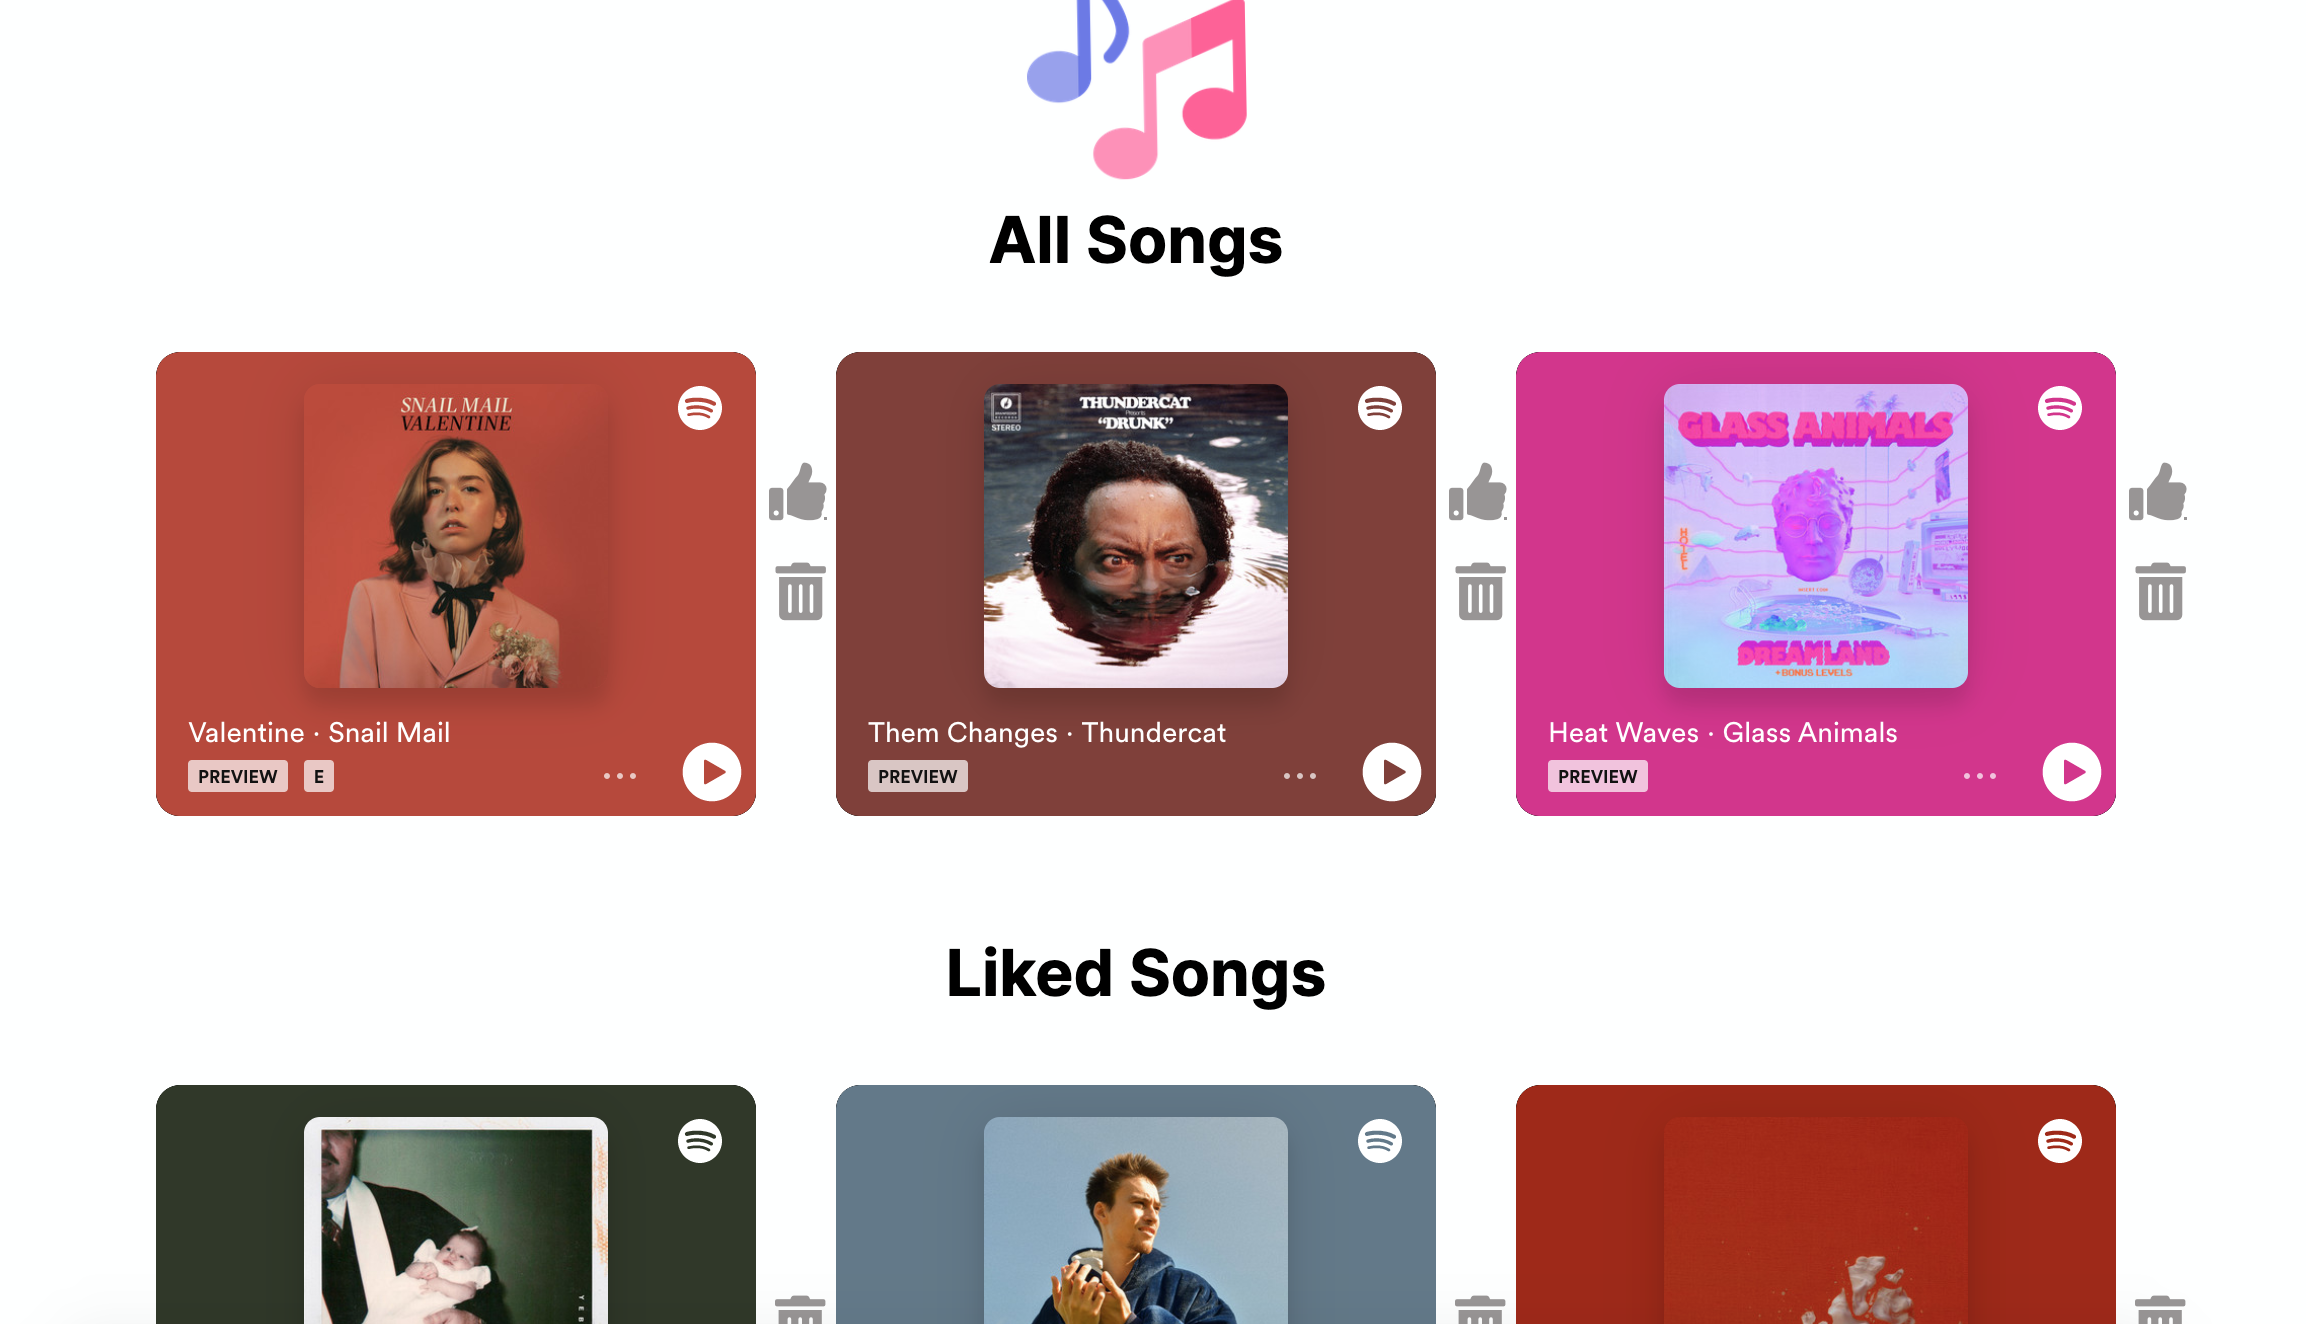 Thumbnail from music rating site, images of spotify embeds and music notes